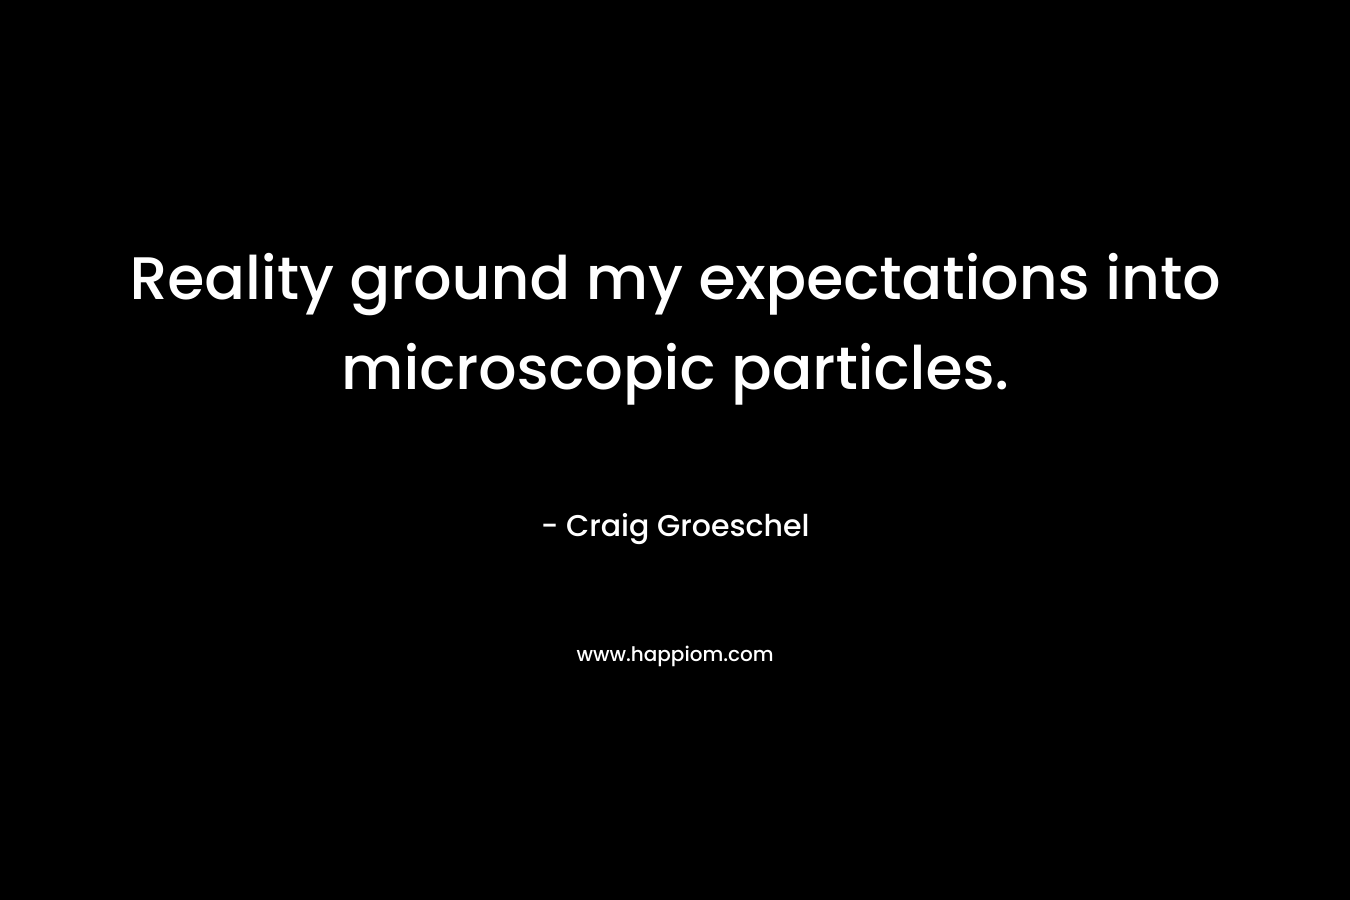 Reality ground my expectations into microscopic particles.